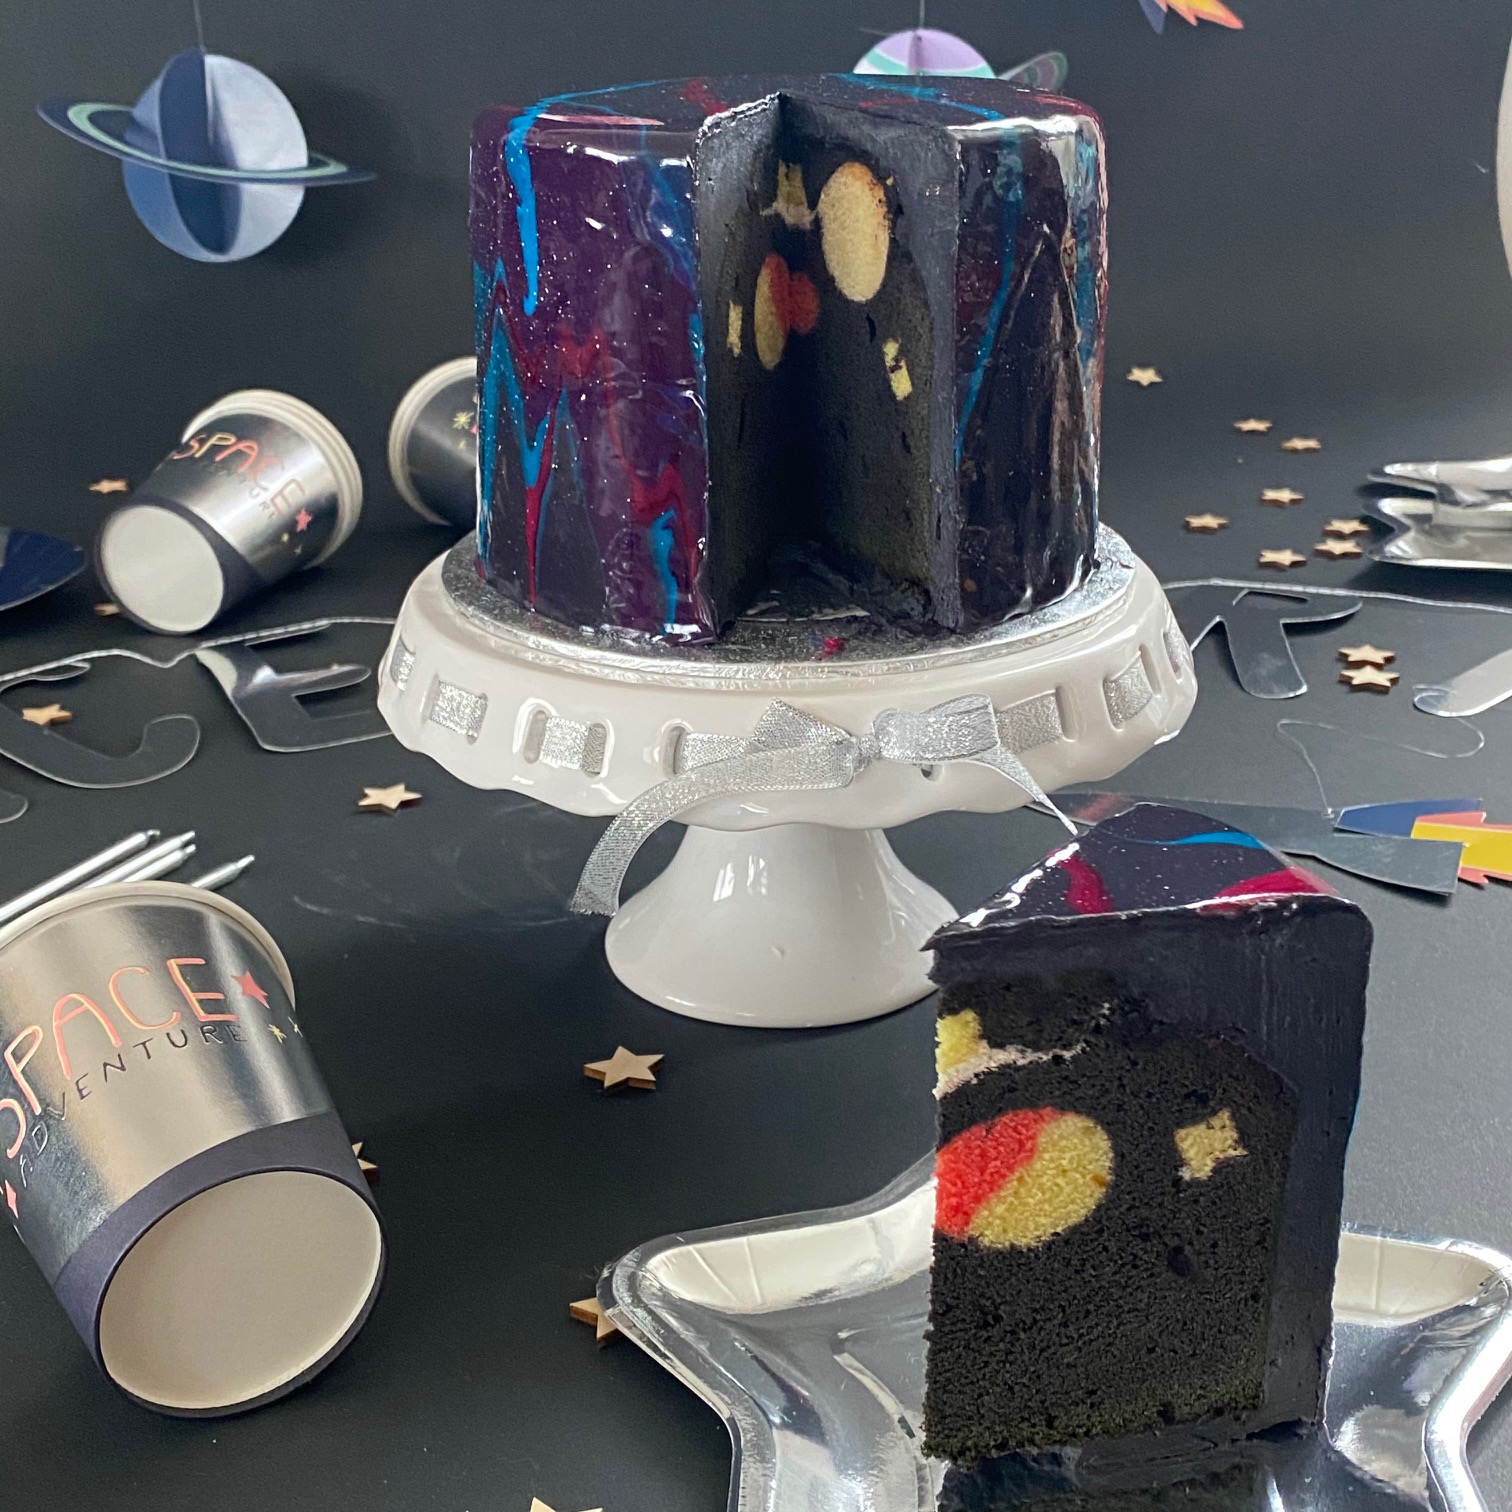 Mirror Glace Galaxy Cake with Planets